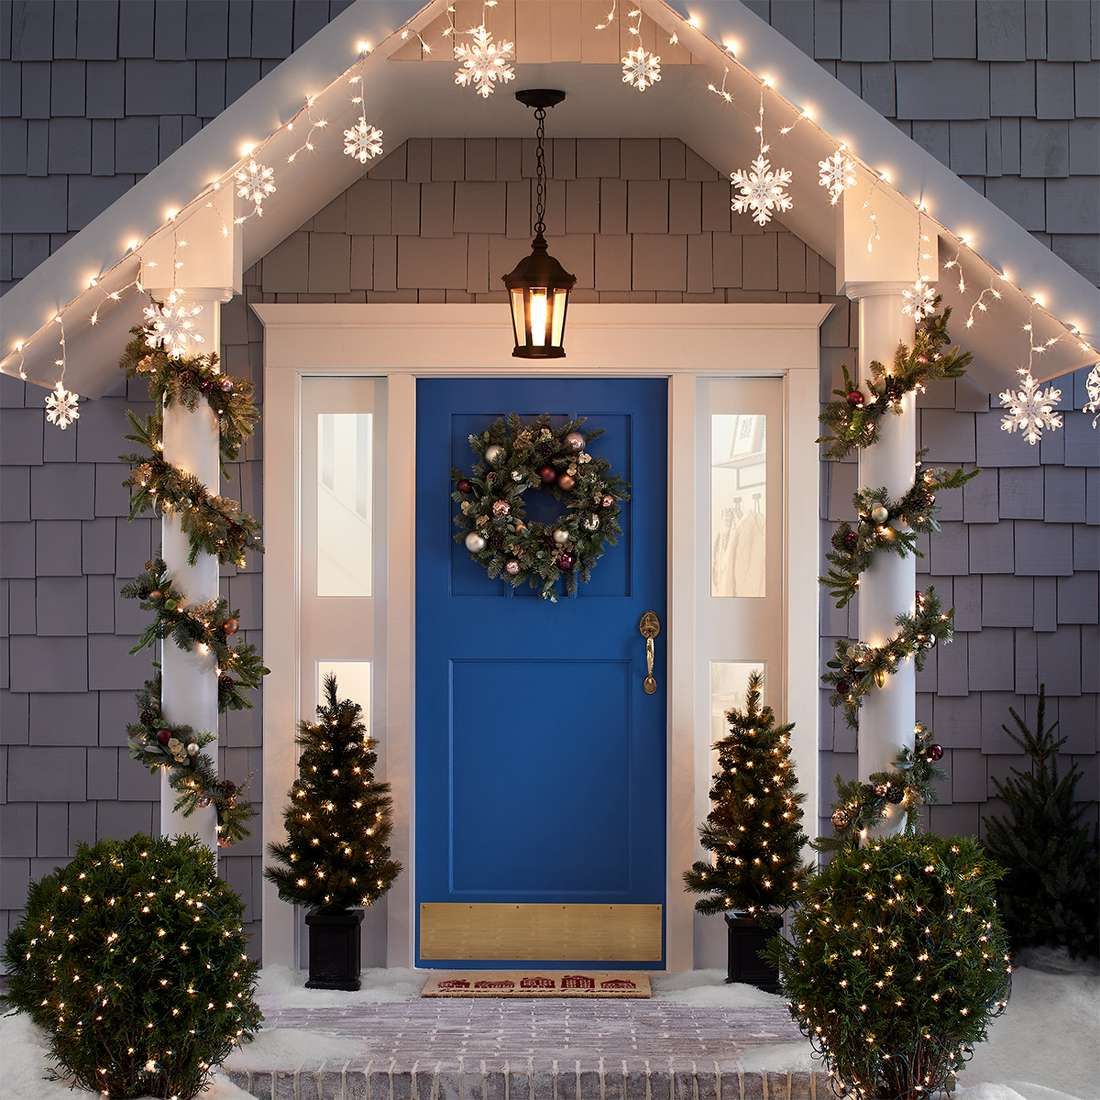 Chic-Outdoor-Christmas-decoration 45+ Christmas Lights Decorations to Let Outdoor Area Twinkle